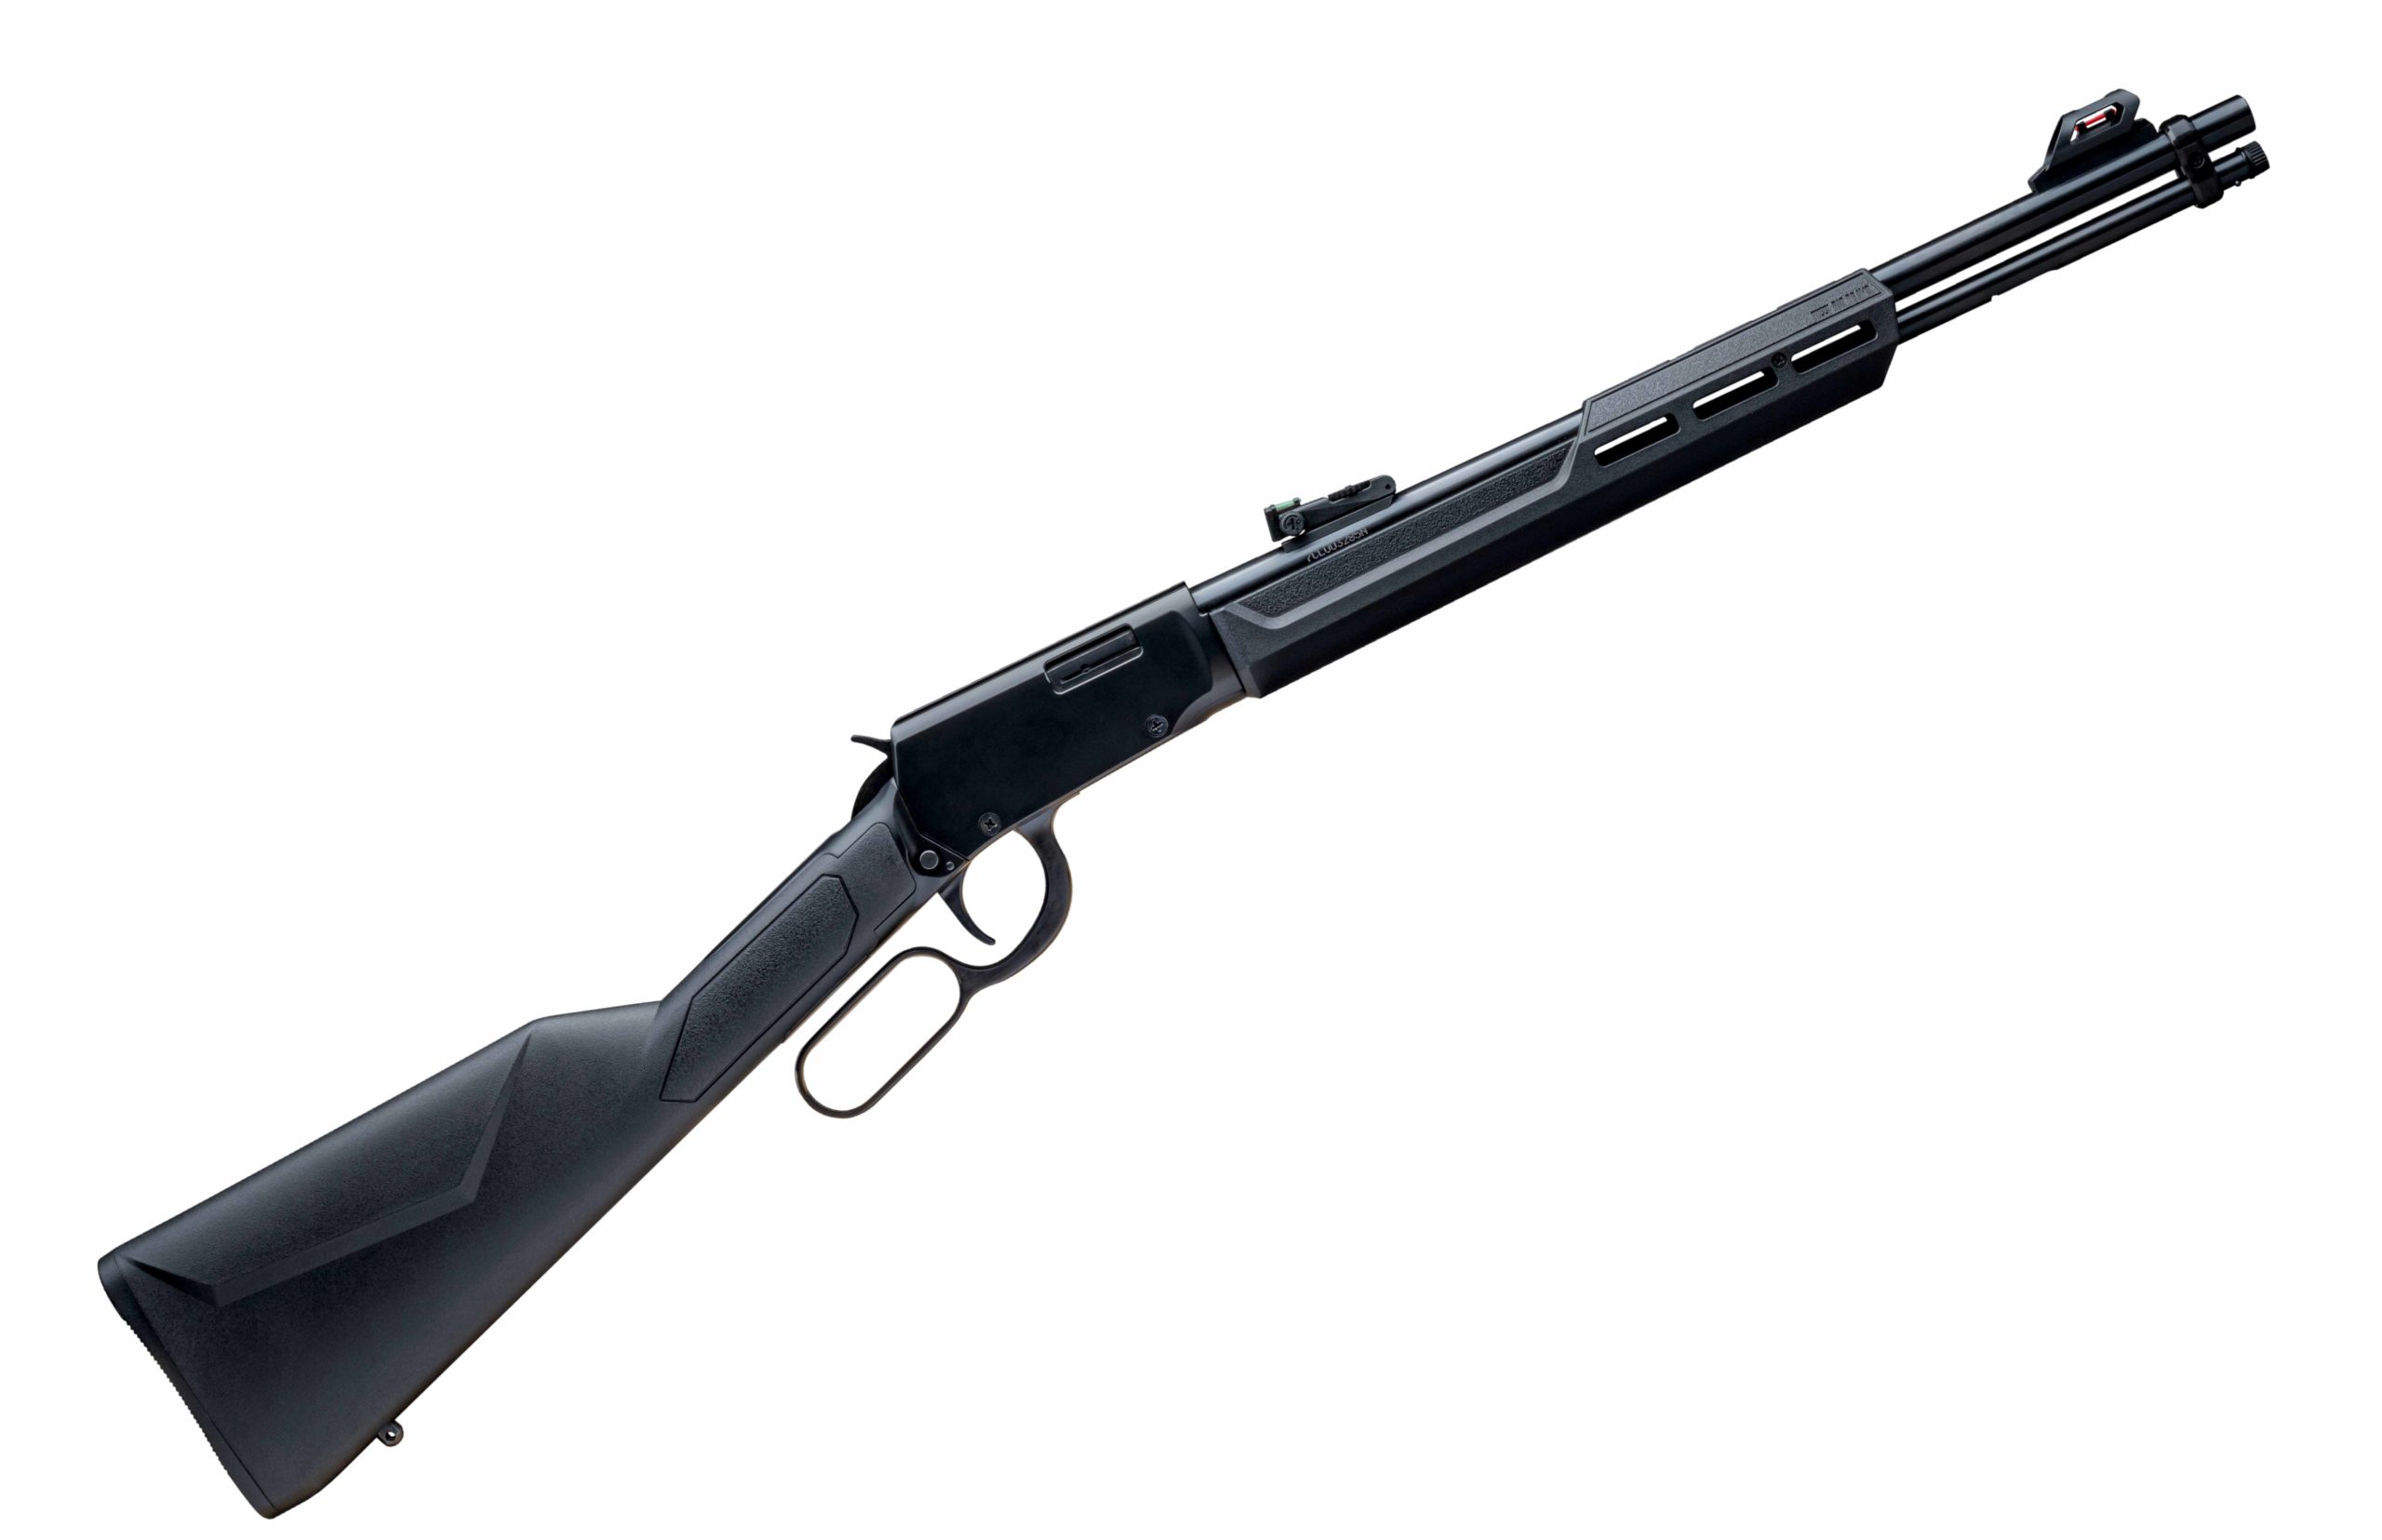 Priced to put it any shooter's reach, the Rio Bravo proves a great value in lever-action .22 rifles.